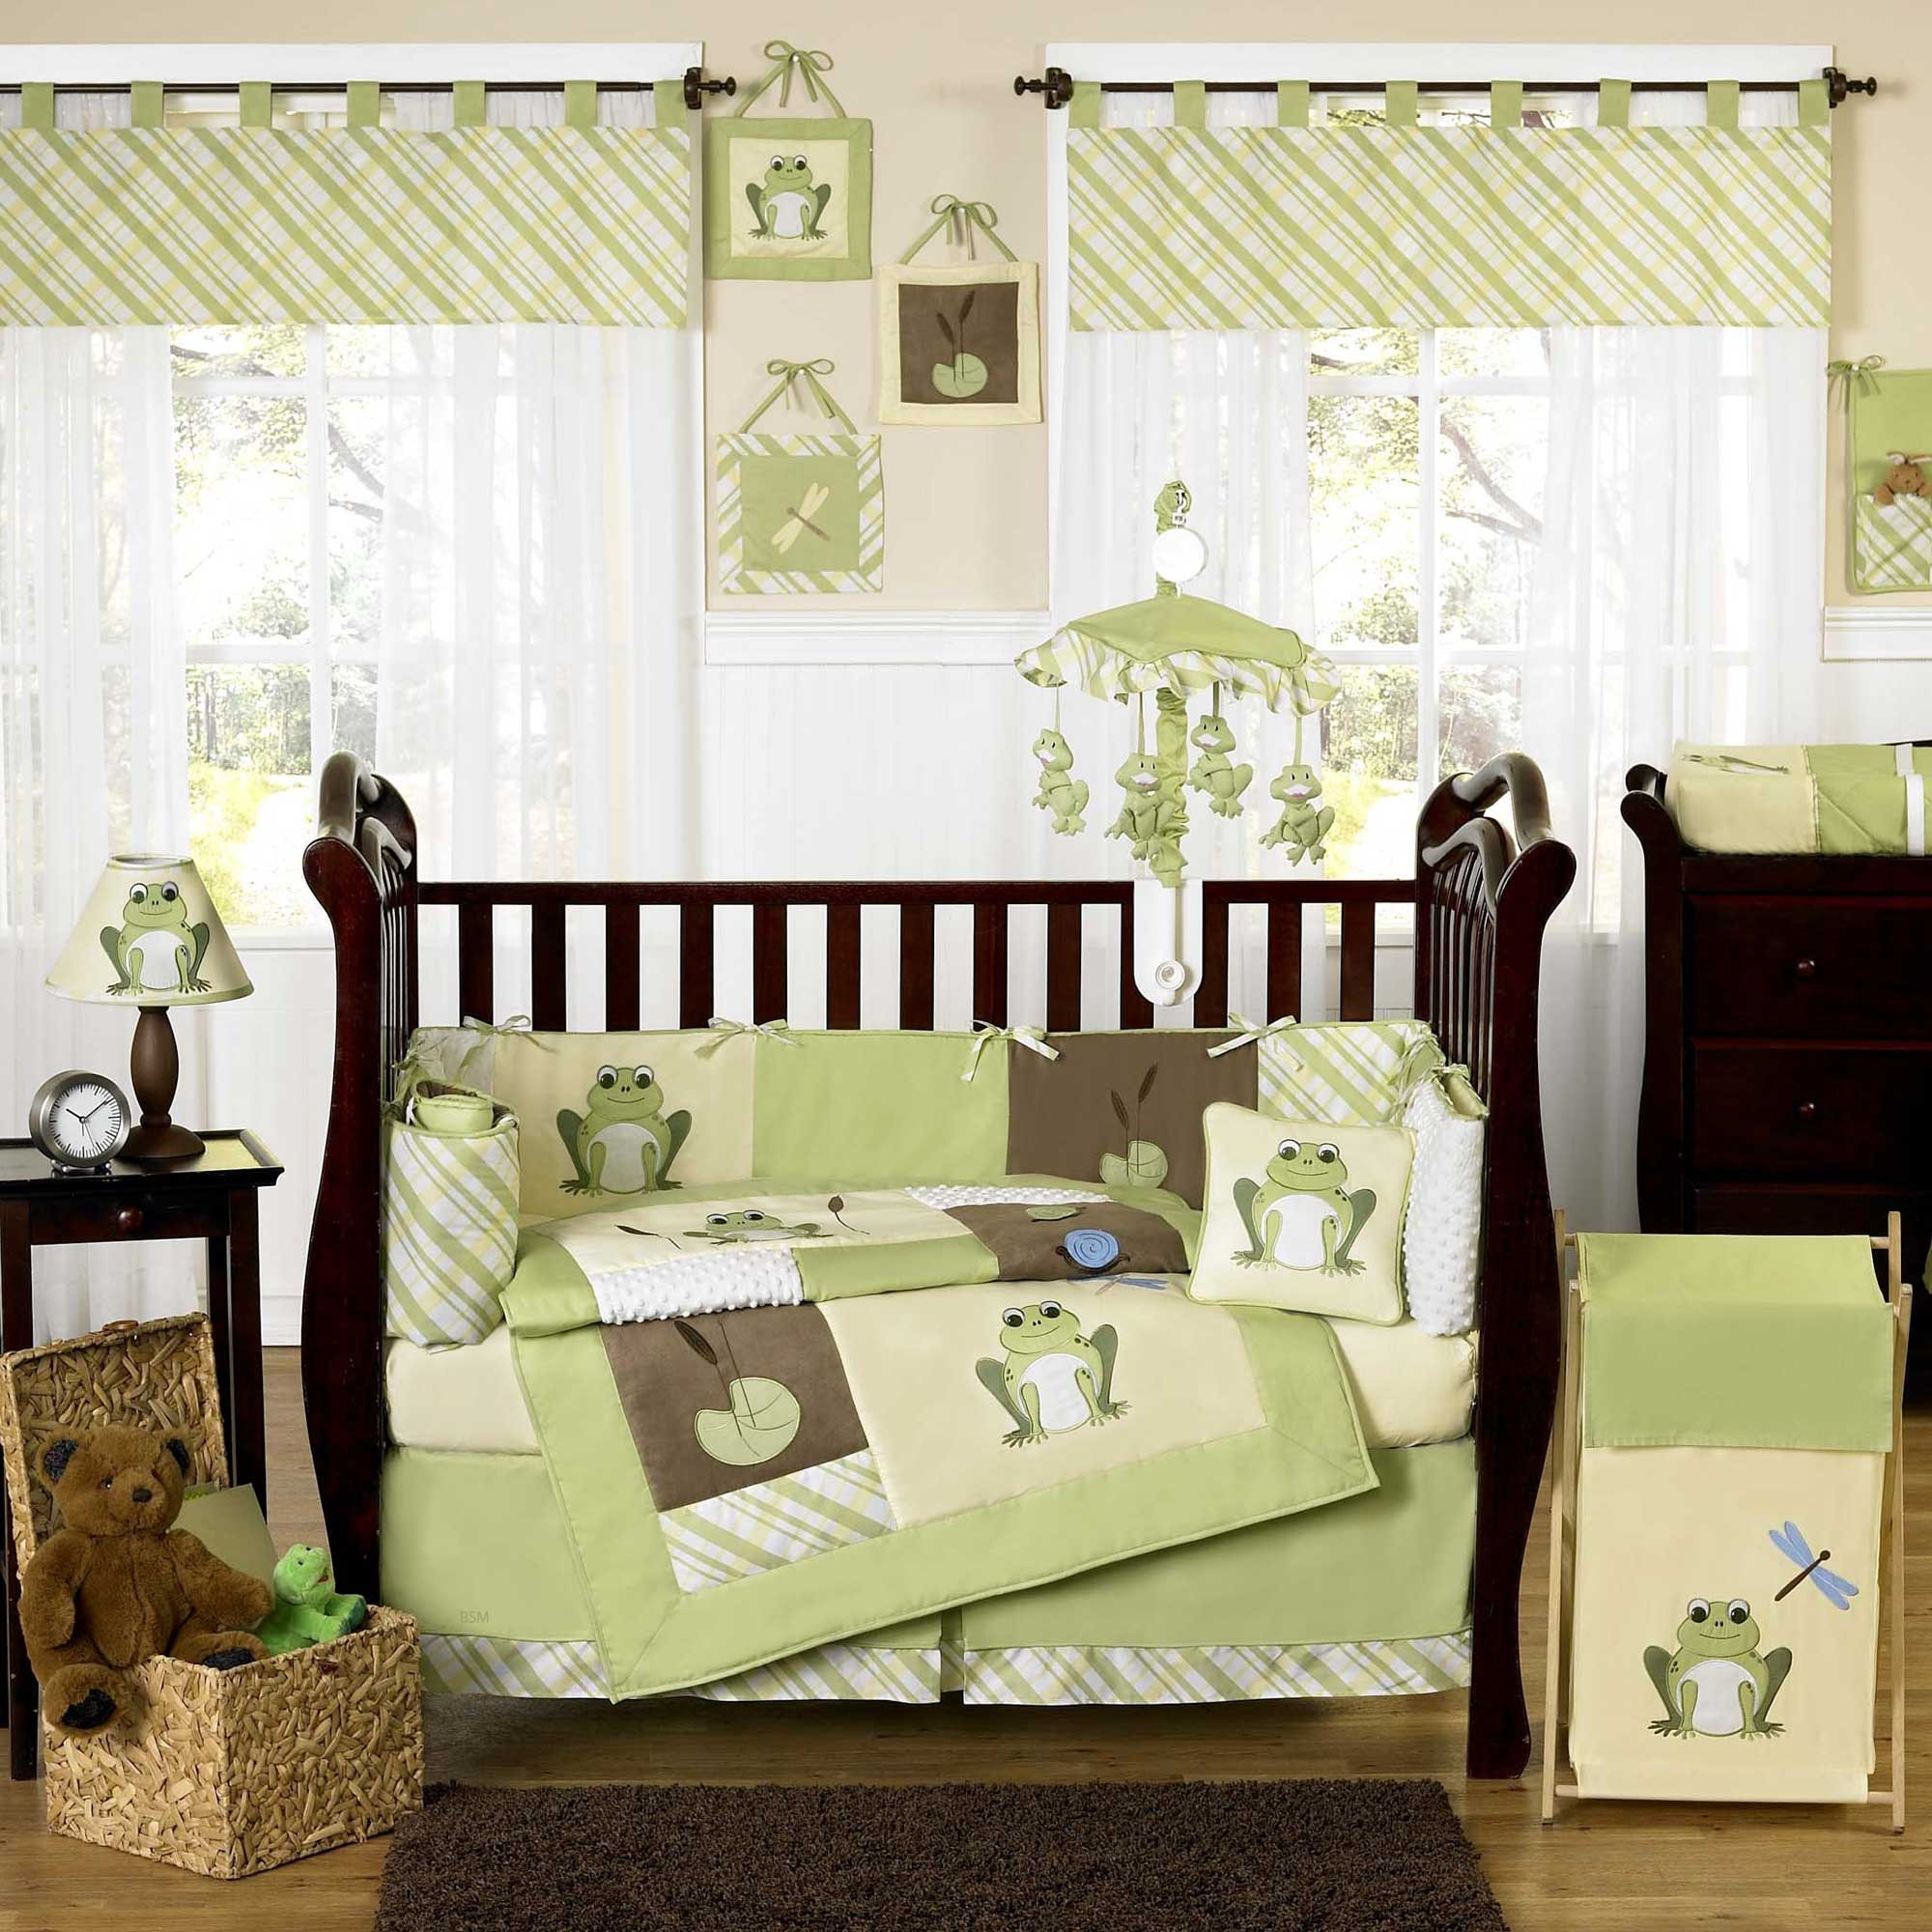 Baby Room Decoration Items
 Themes For Baby Rooms Ideas – HomesFeed